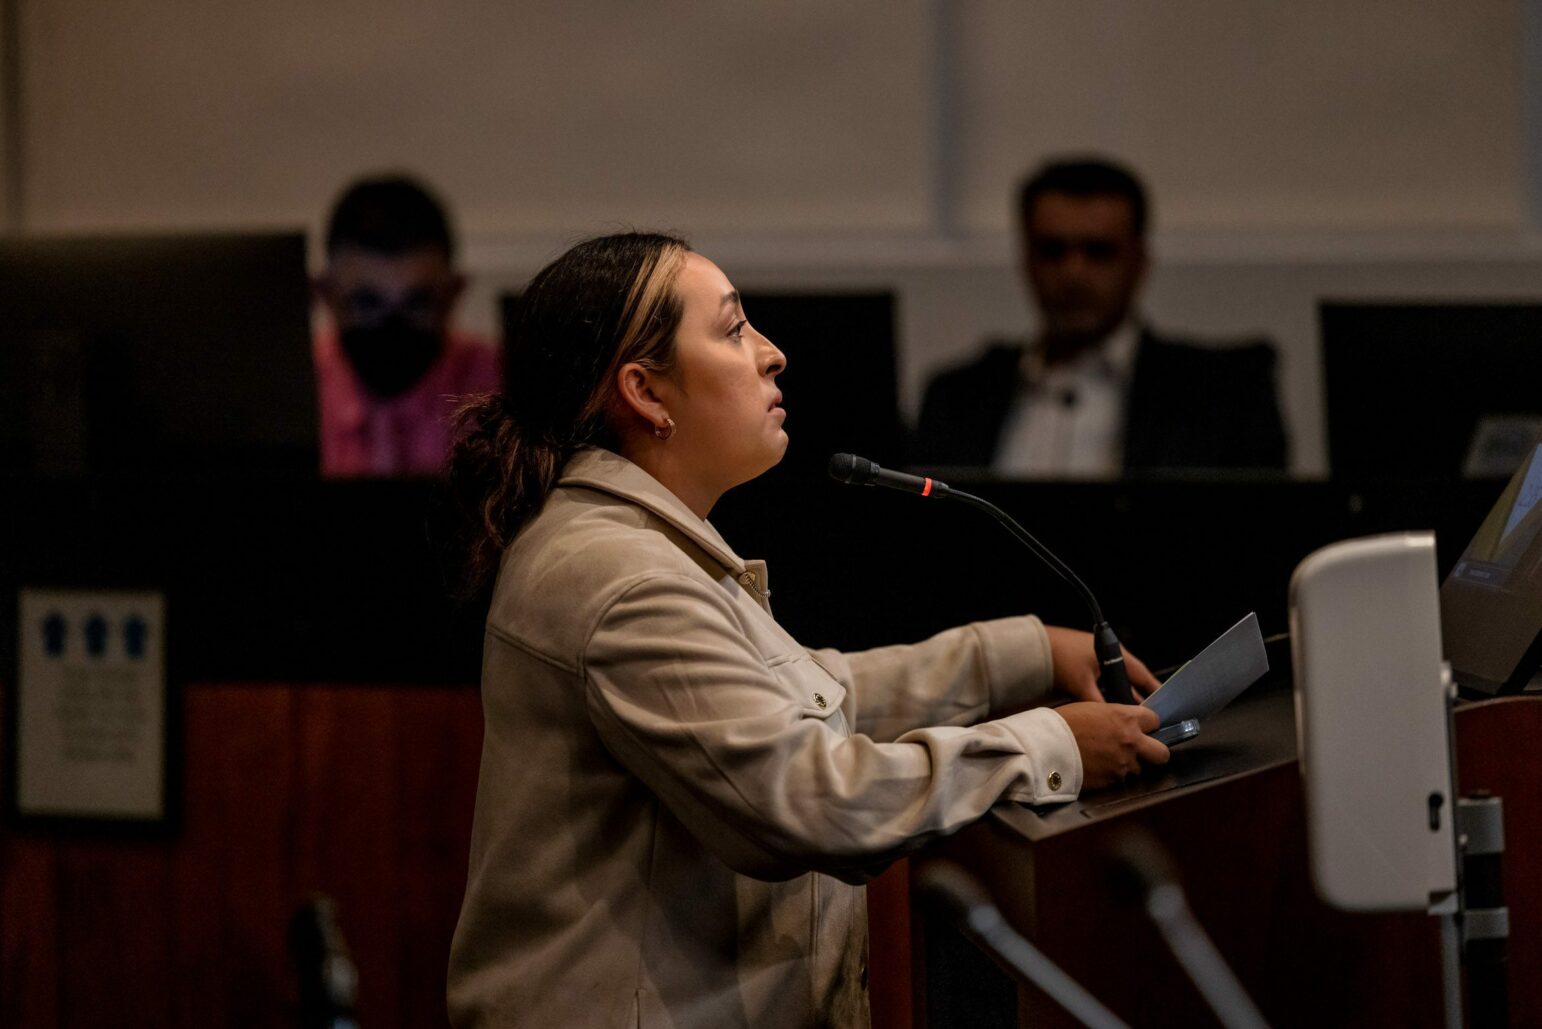 Michelle Monterrosa urges the Vallejo City Council to establish independent oversight of the city's police during a council meeting on August 23, 2022. A Vallejo police detective with three prior nonfatal shootings killed Monterrosa's brother Sean in 2022 after he mistook a hammer in the 22-year-old’s sweatshirt for a gun.